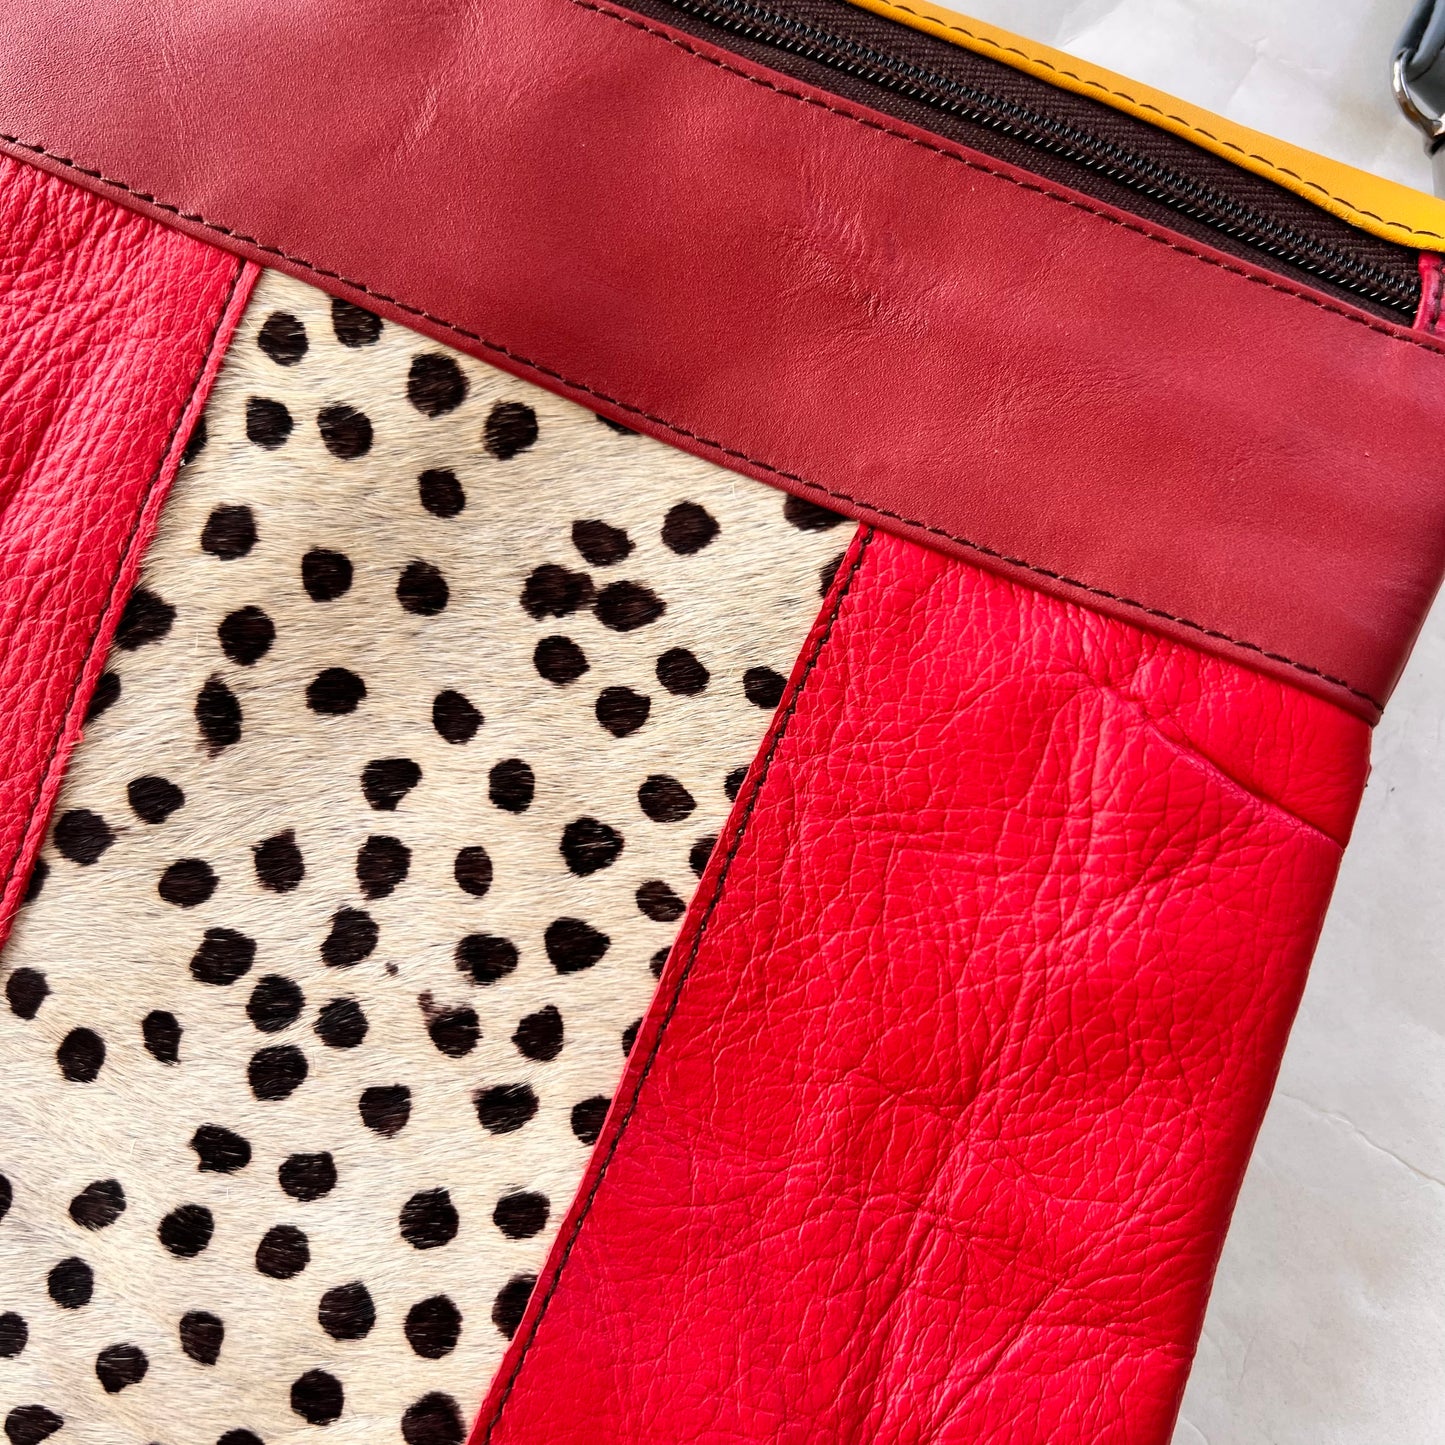 close-up of red greta bag with animal print block in the center with maroon stripe and zipper across the top.